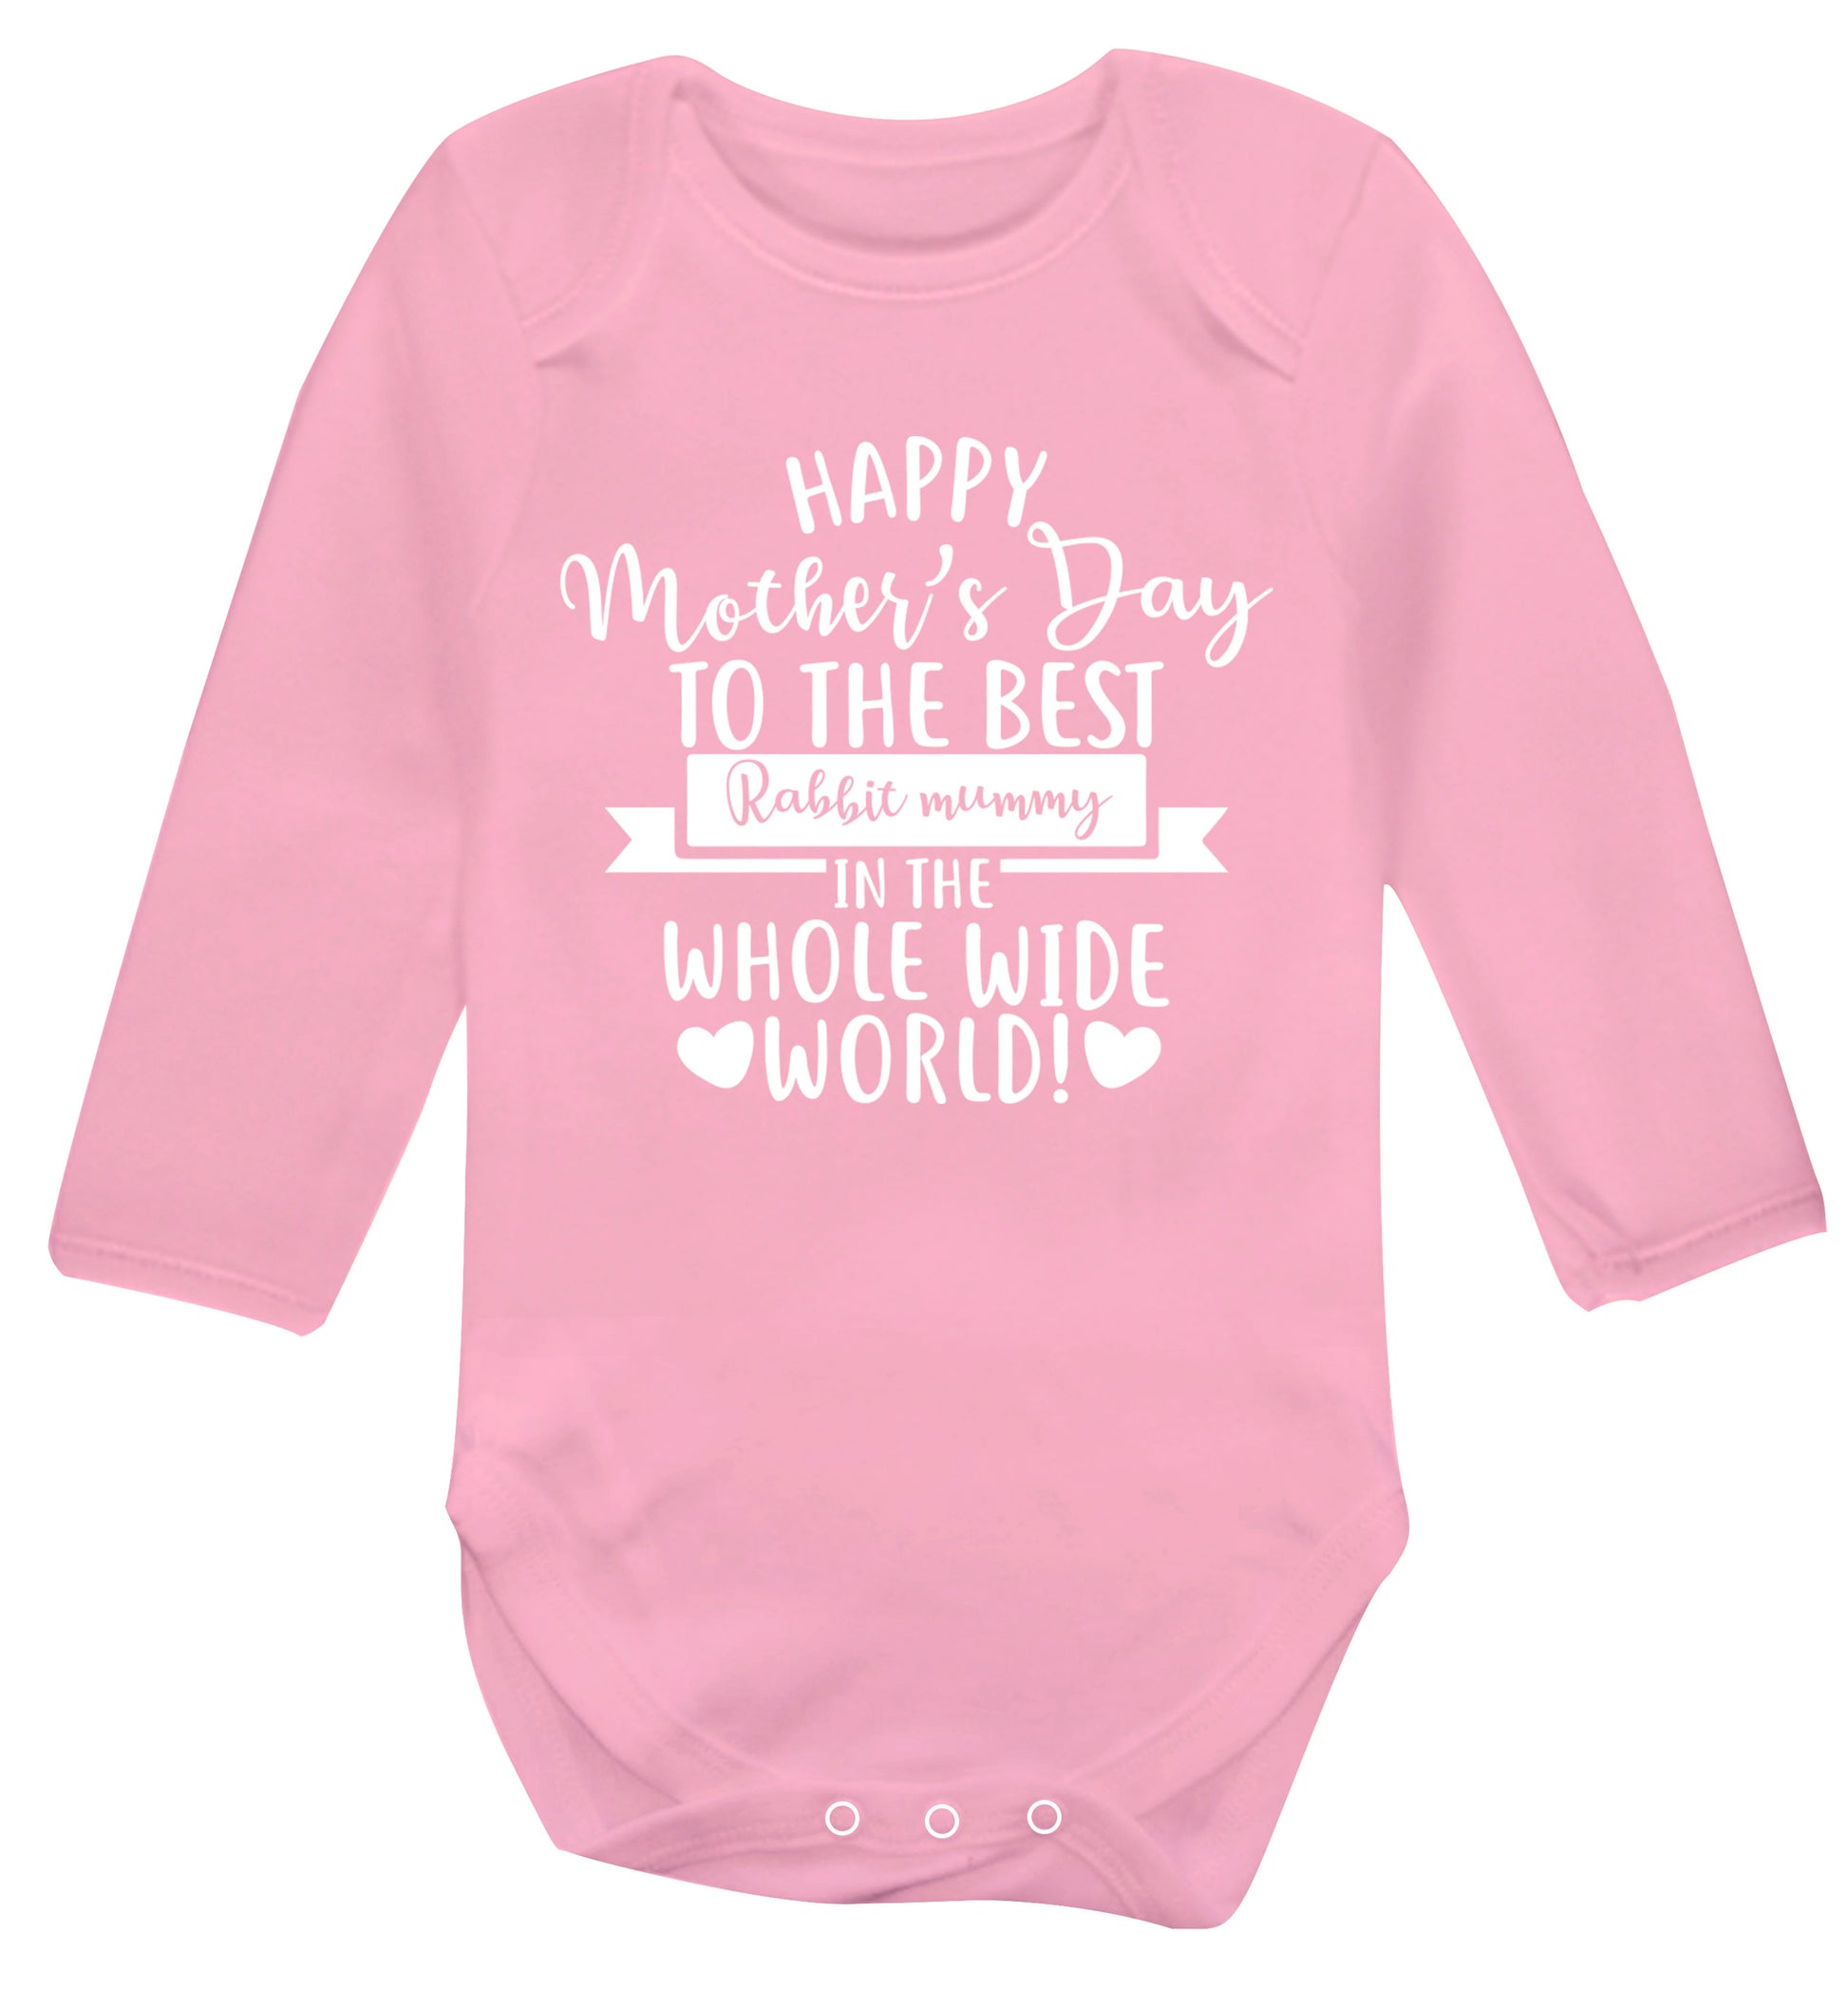 Happy mother's day to the best rabbit mummy in the world Baby Vest long sleeved pale pink 6-12 months